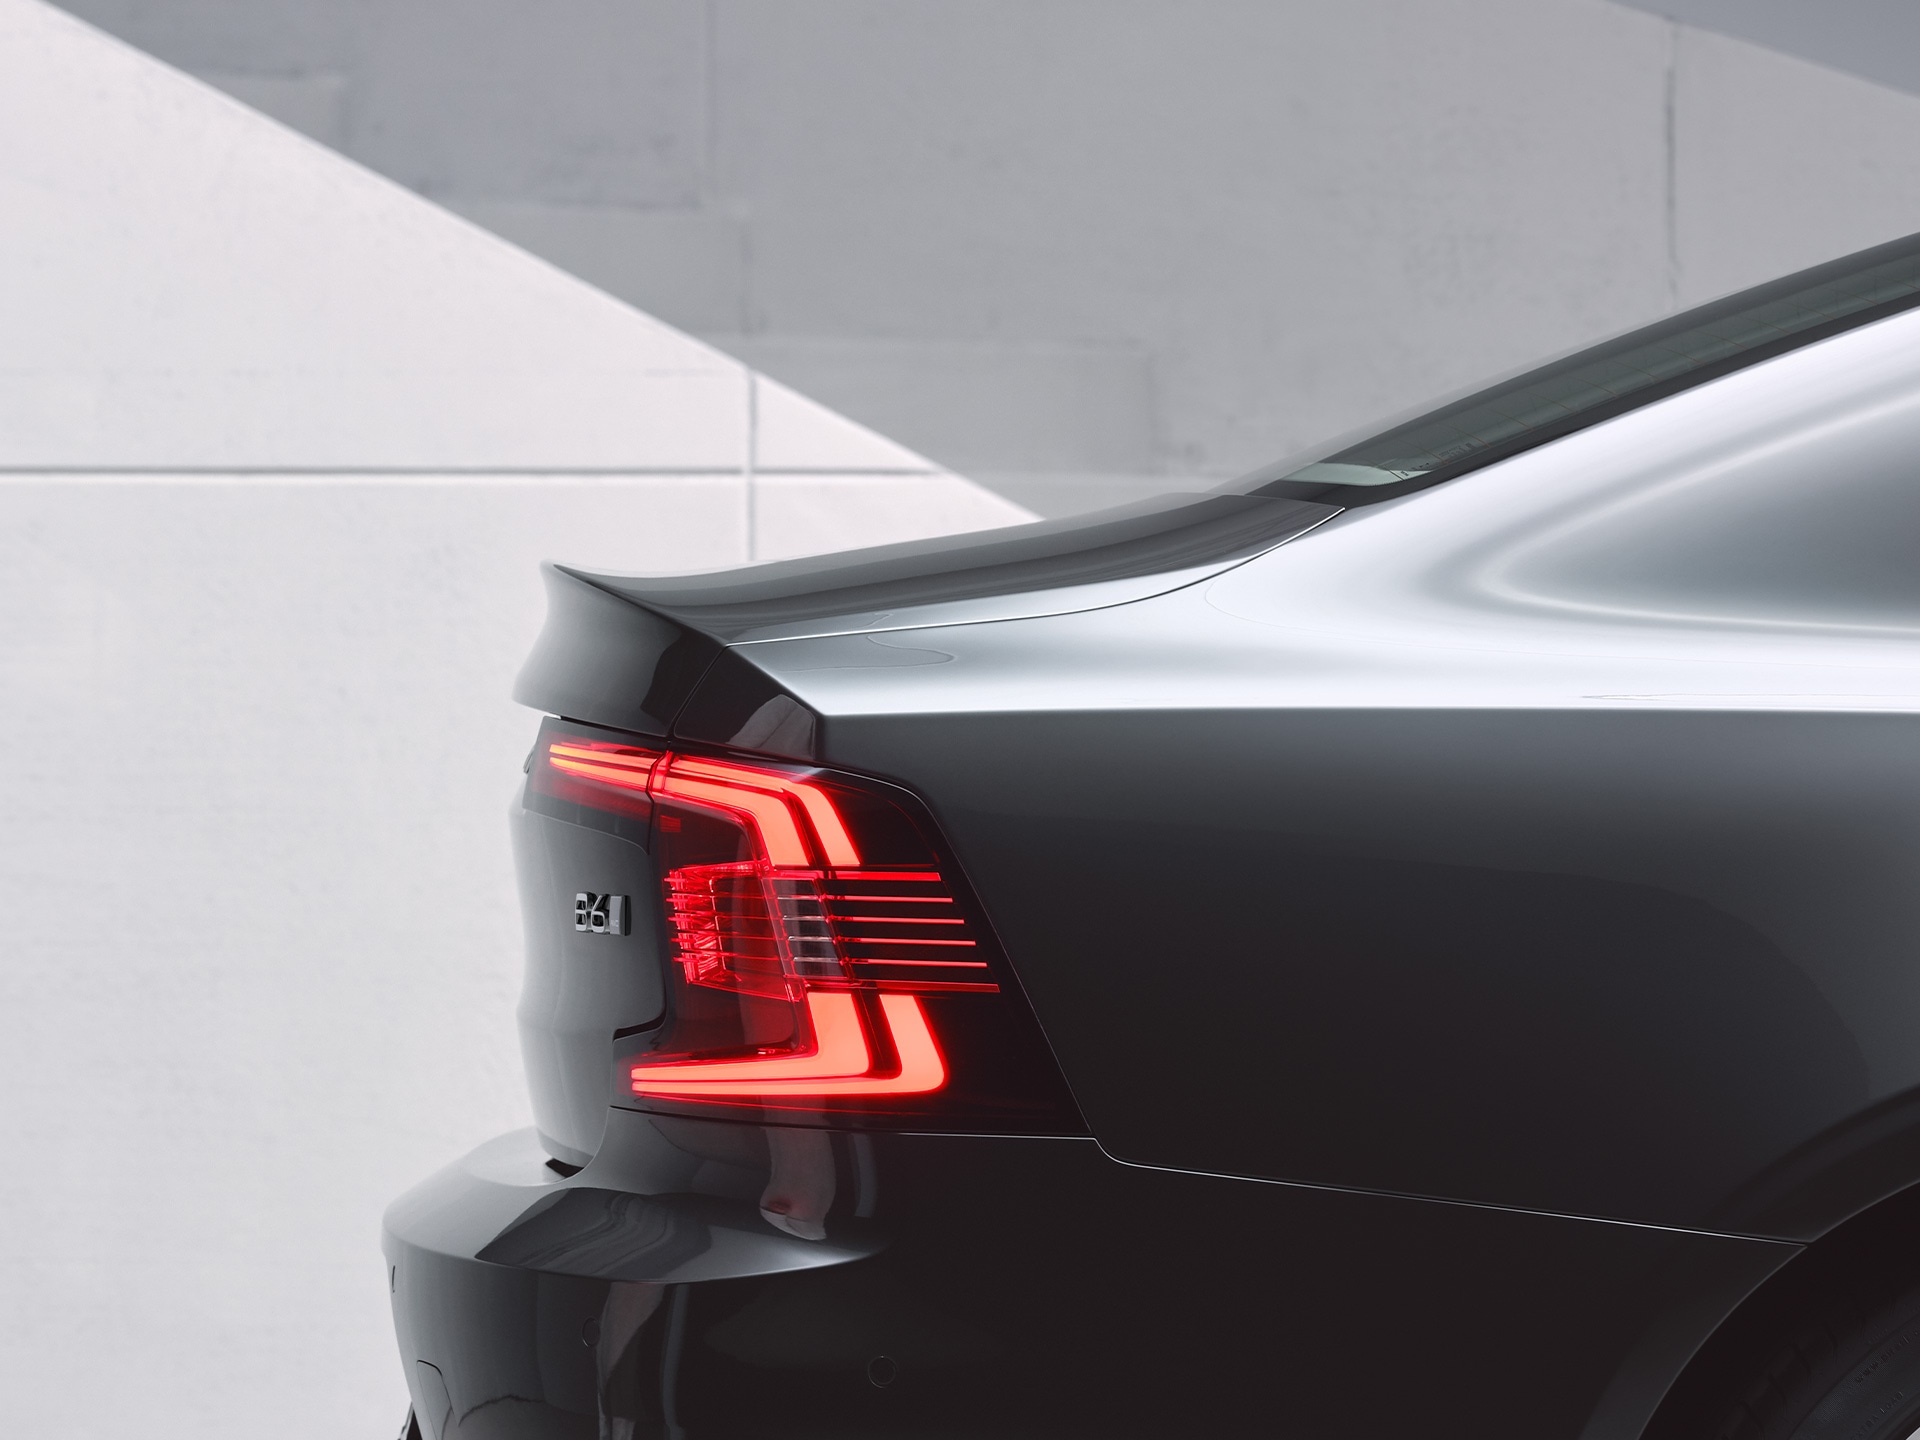 Rear view of Volvo S90 with full LED rear lamps.